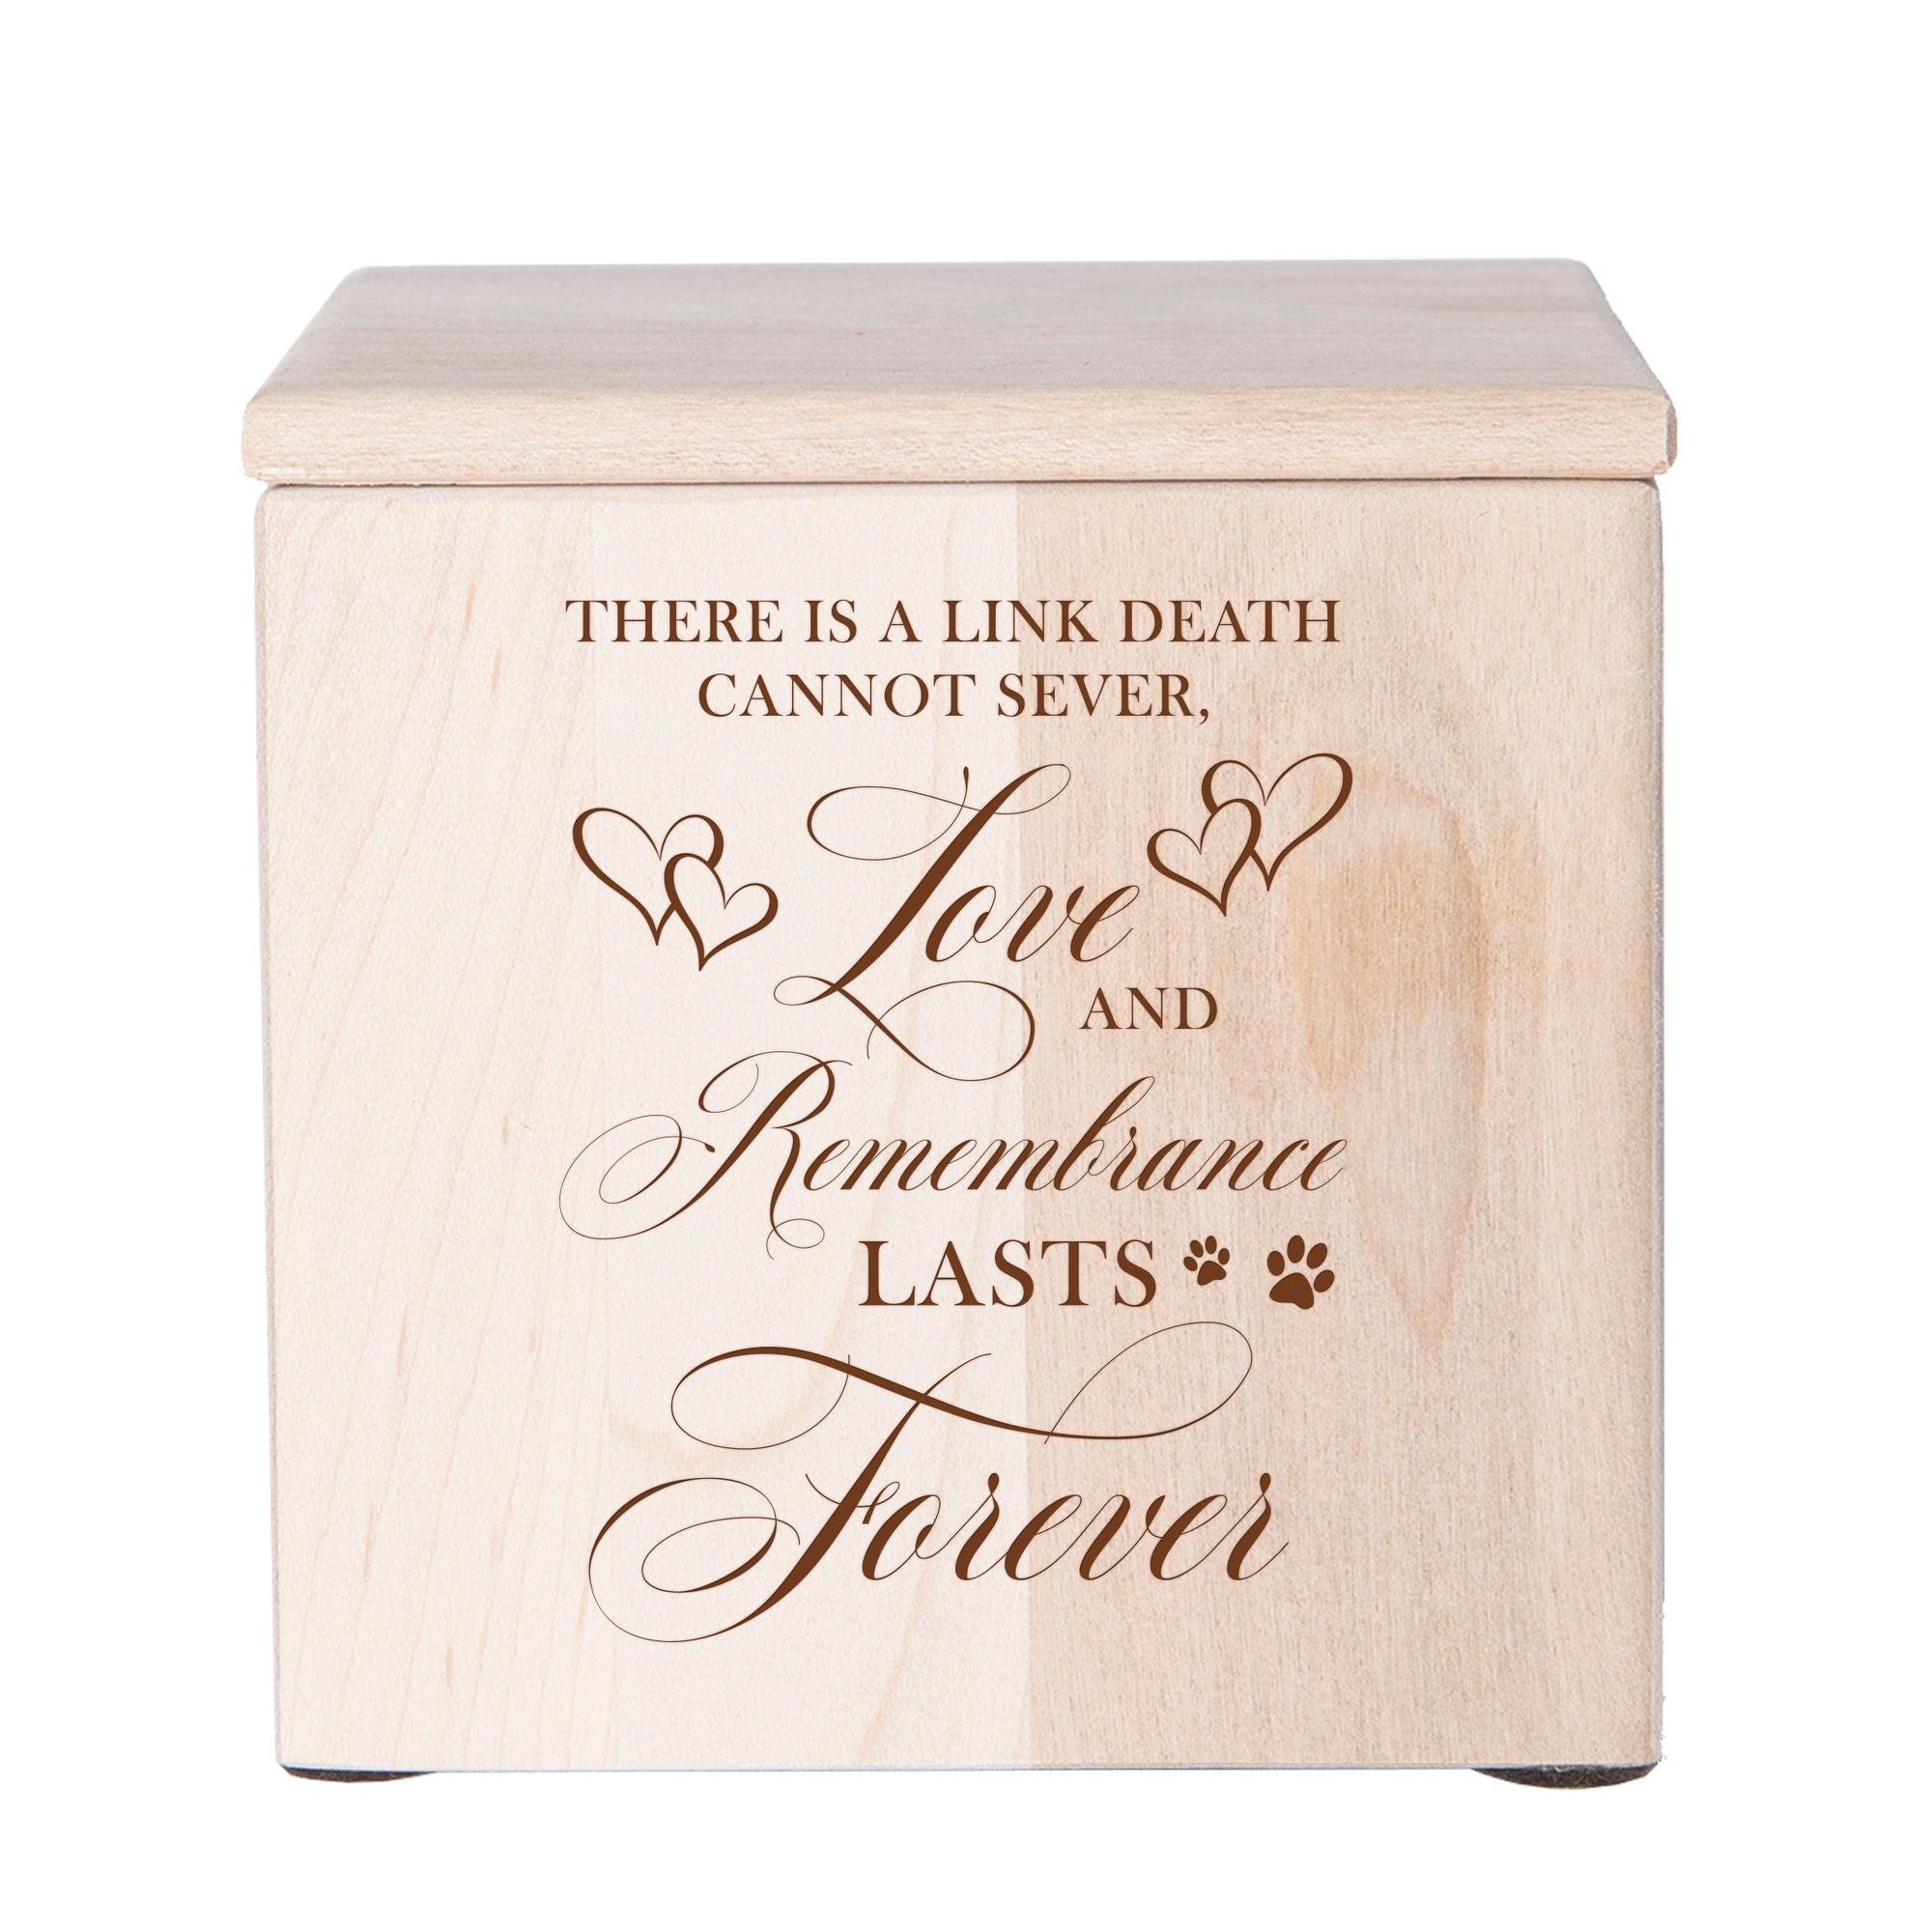 Pet Memorial Keepsake Cremation Urn Box for Dog or Cat - There Is A Link Death Cannot Sever